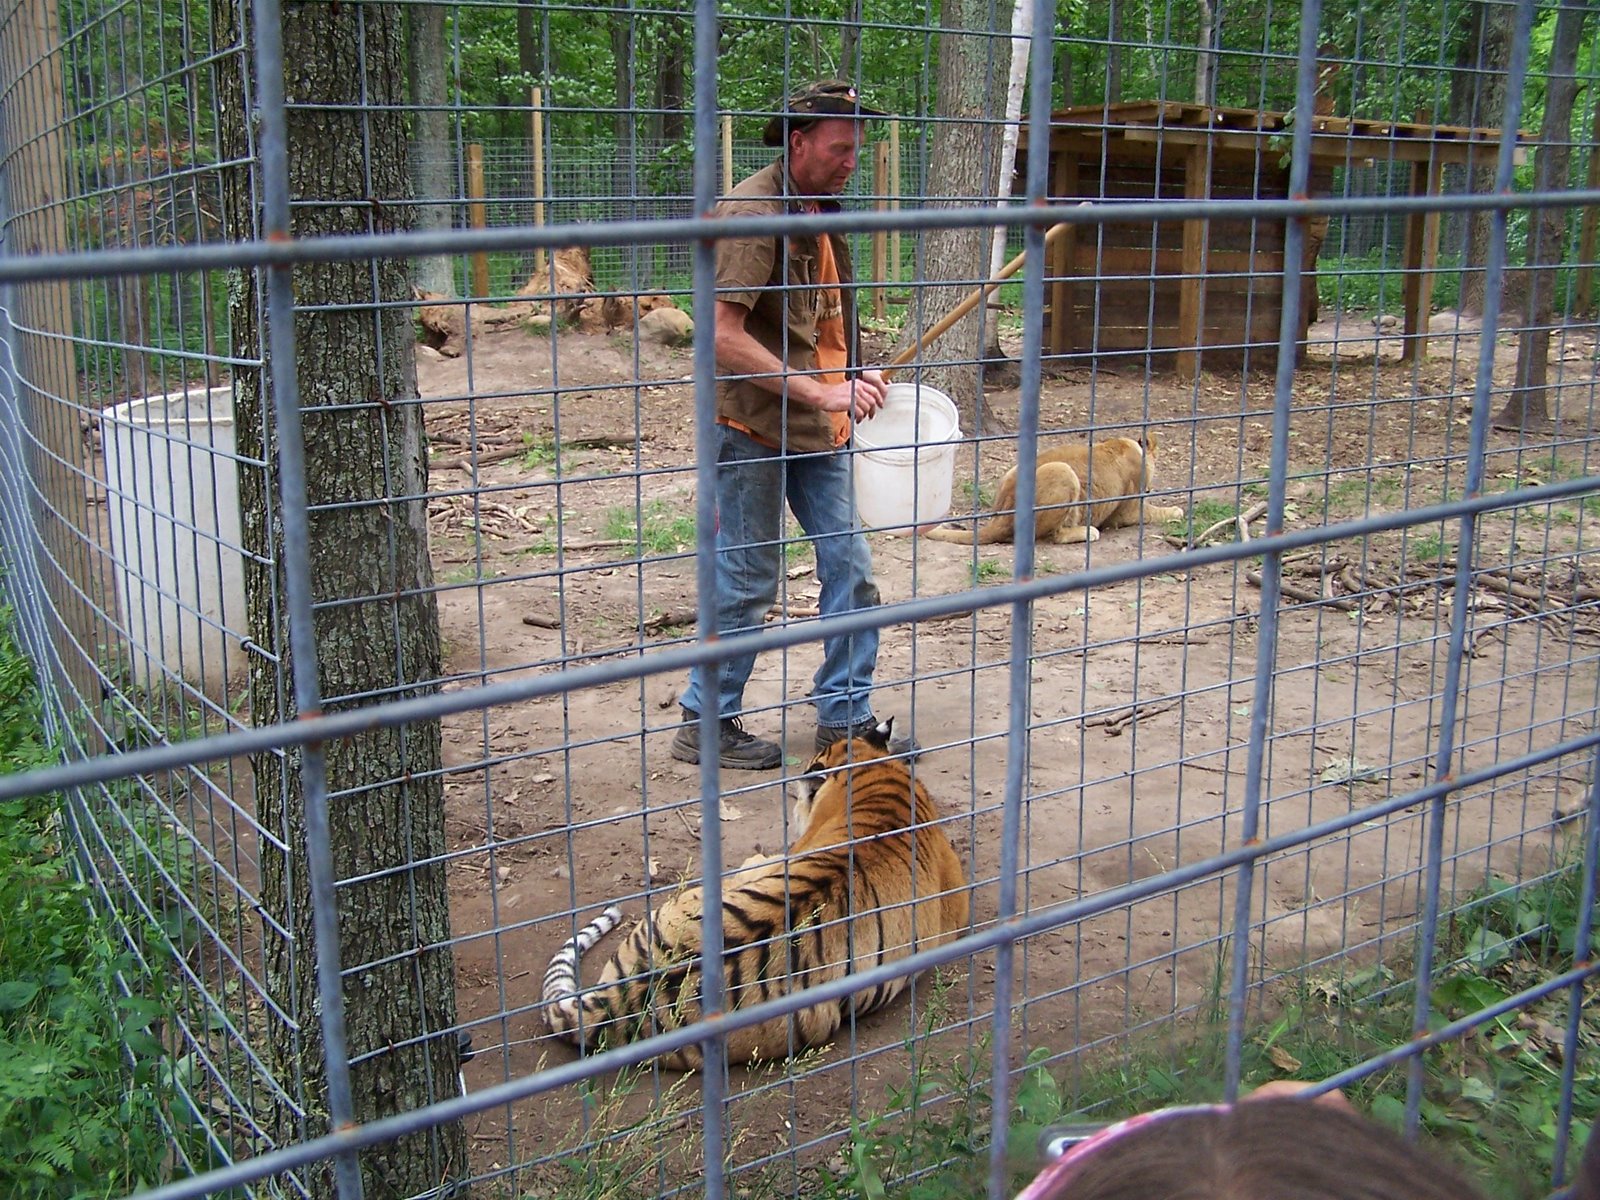 [bud+in+the+tiger+cage.jpg]